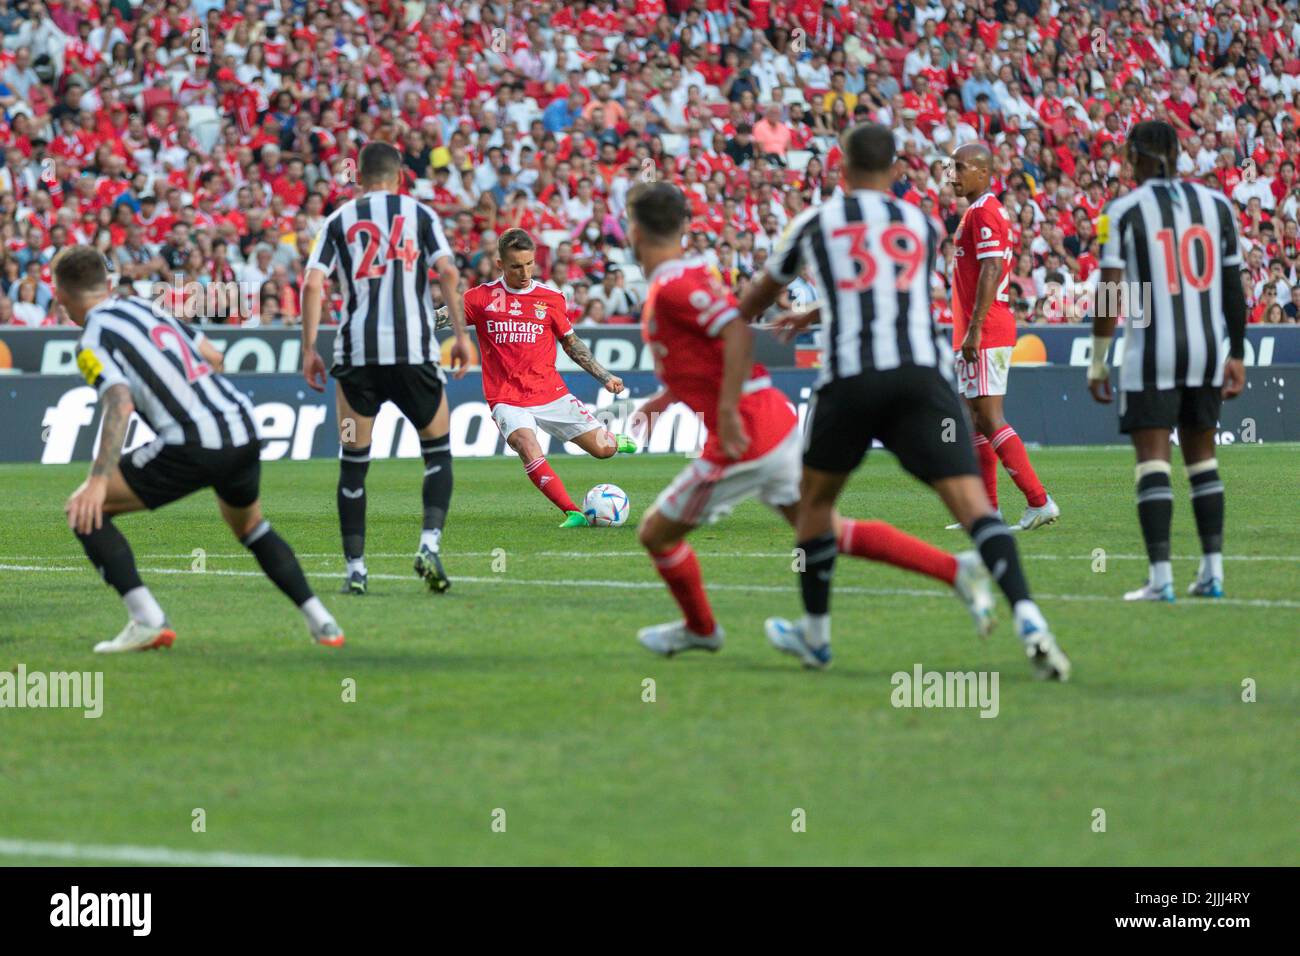 Lisbon, Portugal. July 26, 2022.  Benfica's defender from Spain Alex Grimaldo (3) in action during the friendly game between SL Benfica vs Newcastle United FC Credit: Alexandre de Sousa/Alamy Live News Stock Photo